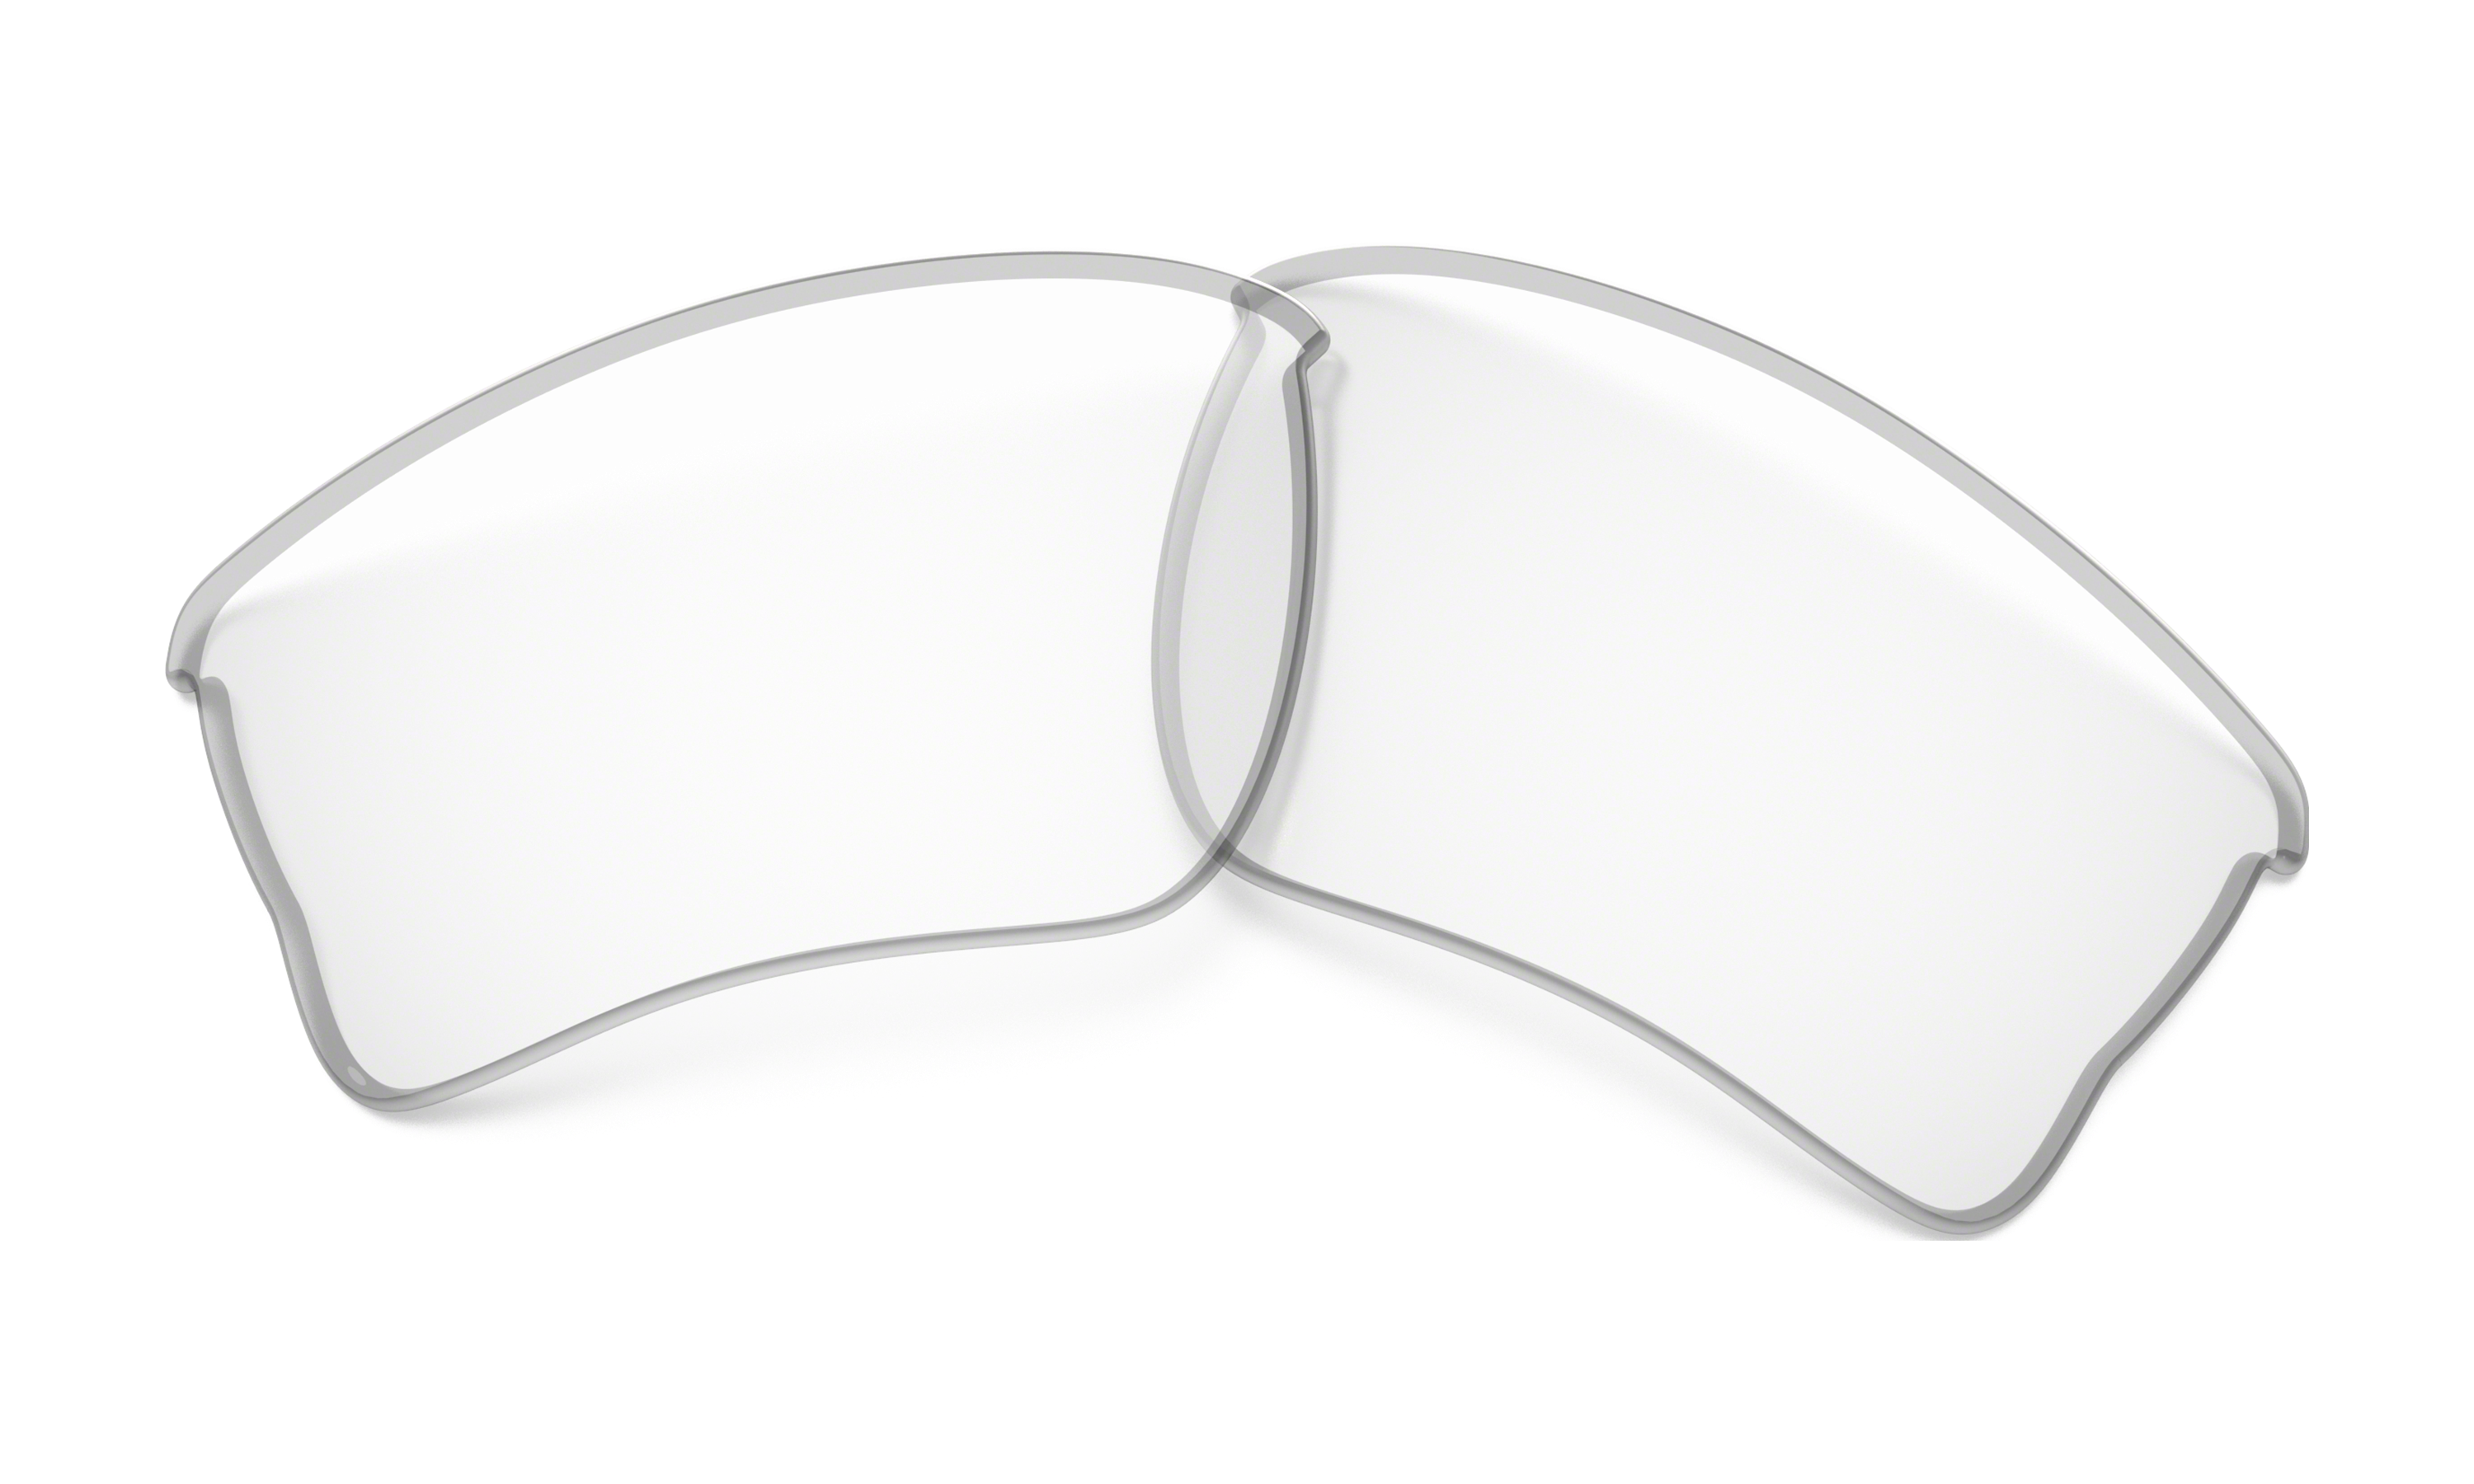 oakley youth quarter jacket replacement lenses